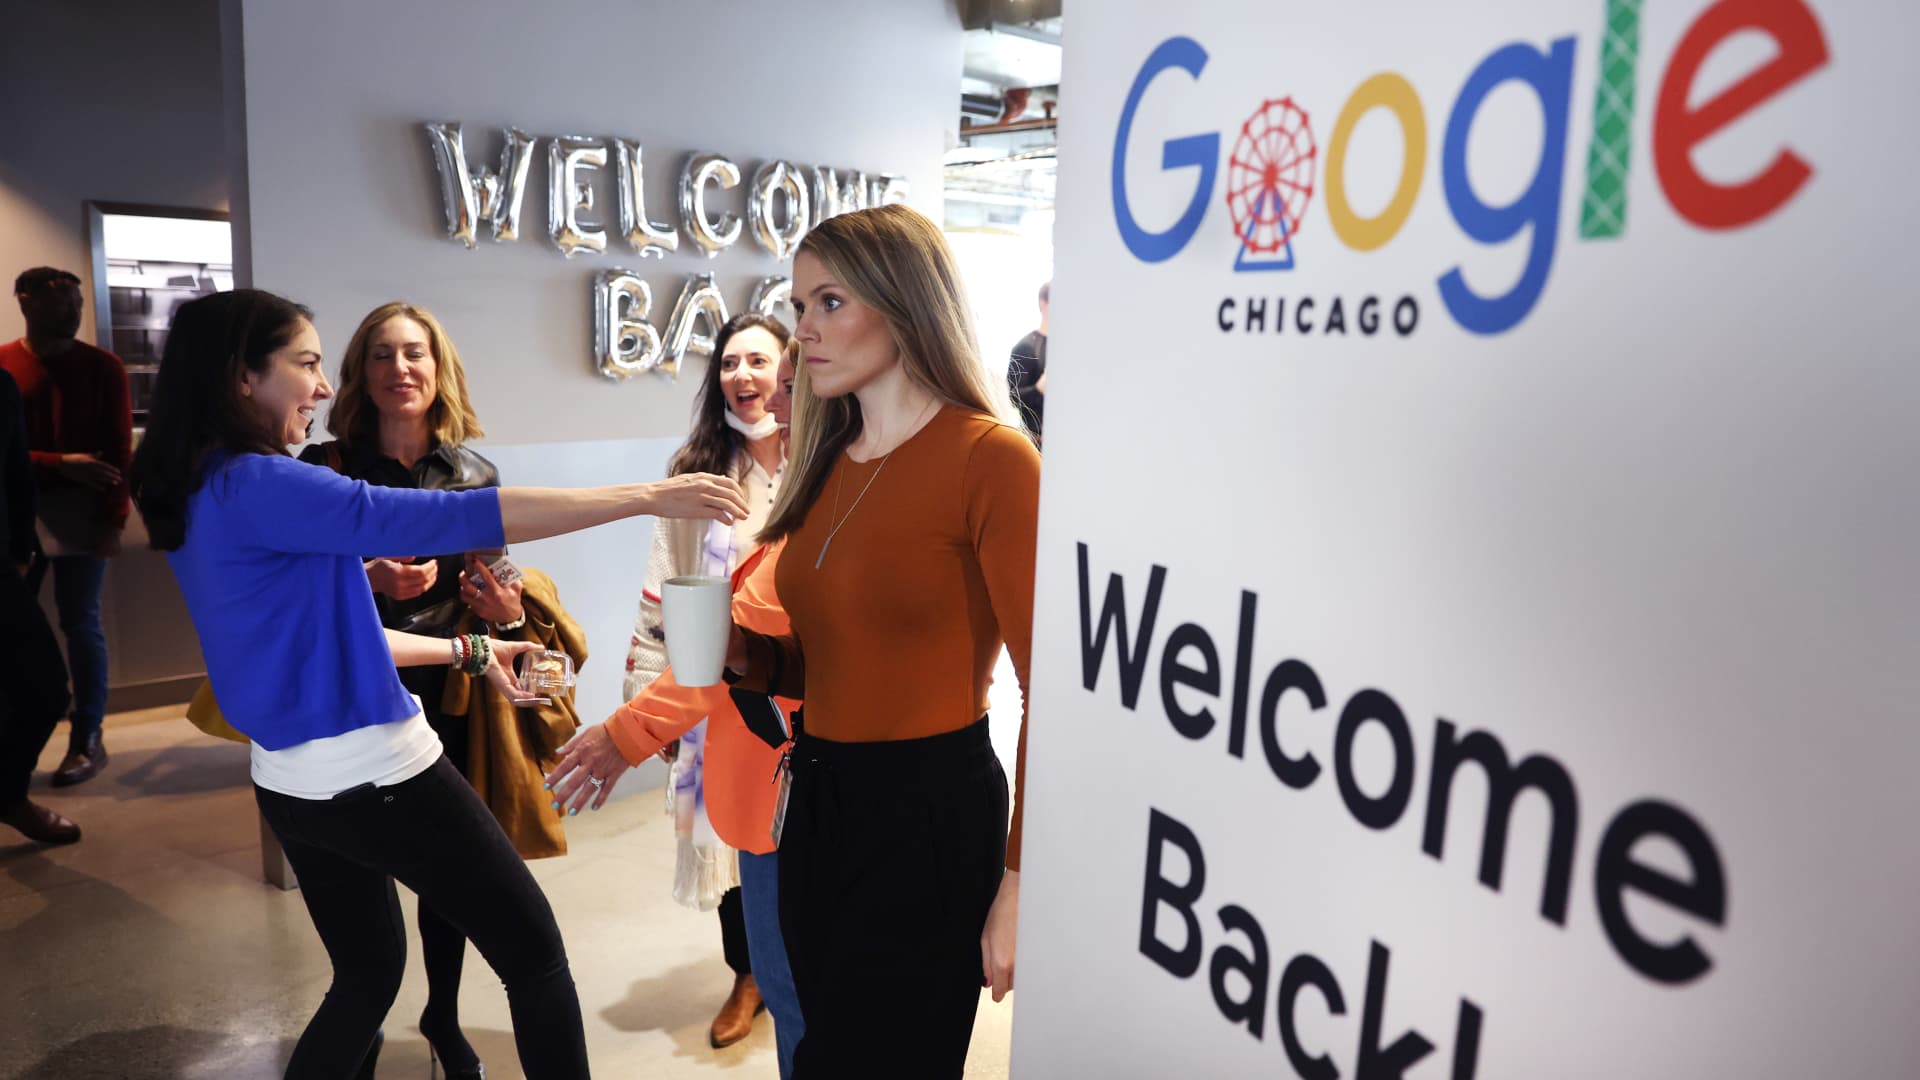 Employees are welcomed back to work with breakfast in the cafeteria at the Chicago Google offices on April 05, 2022 in Chicago, Illinois. 